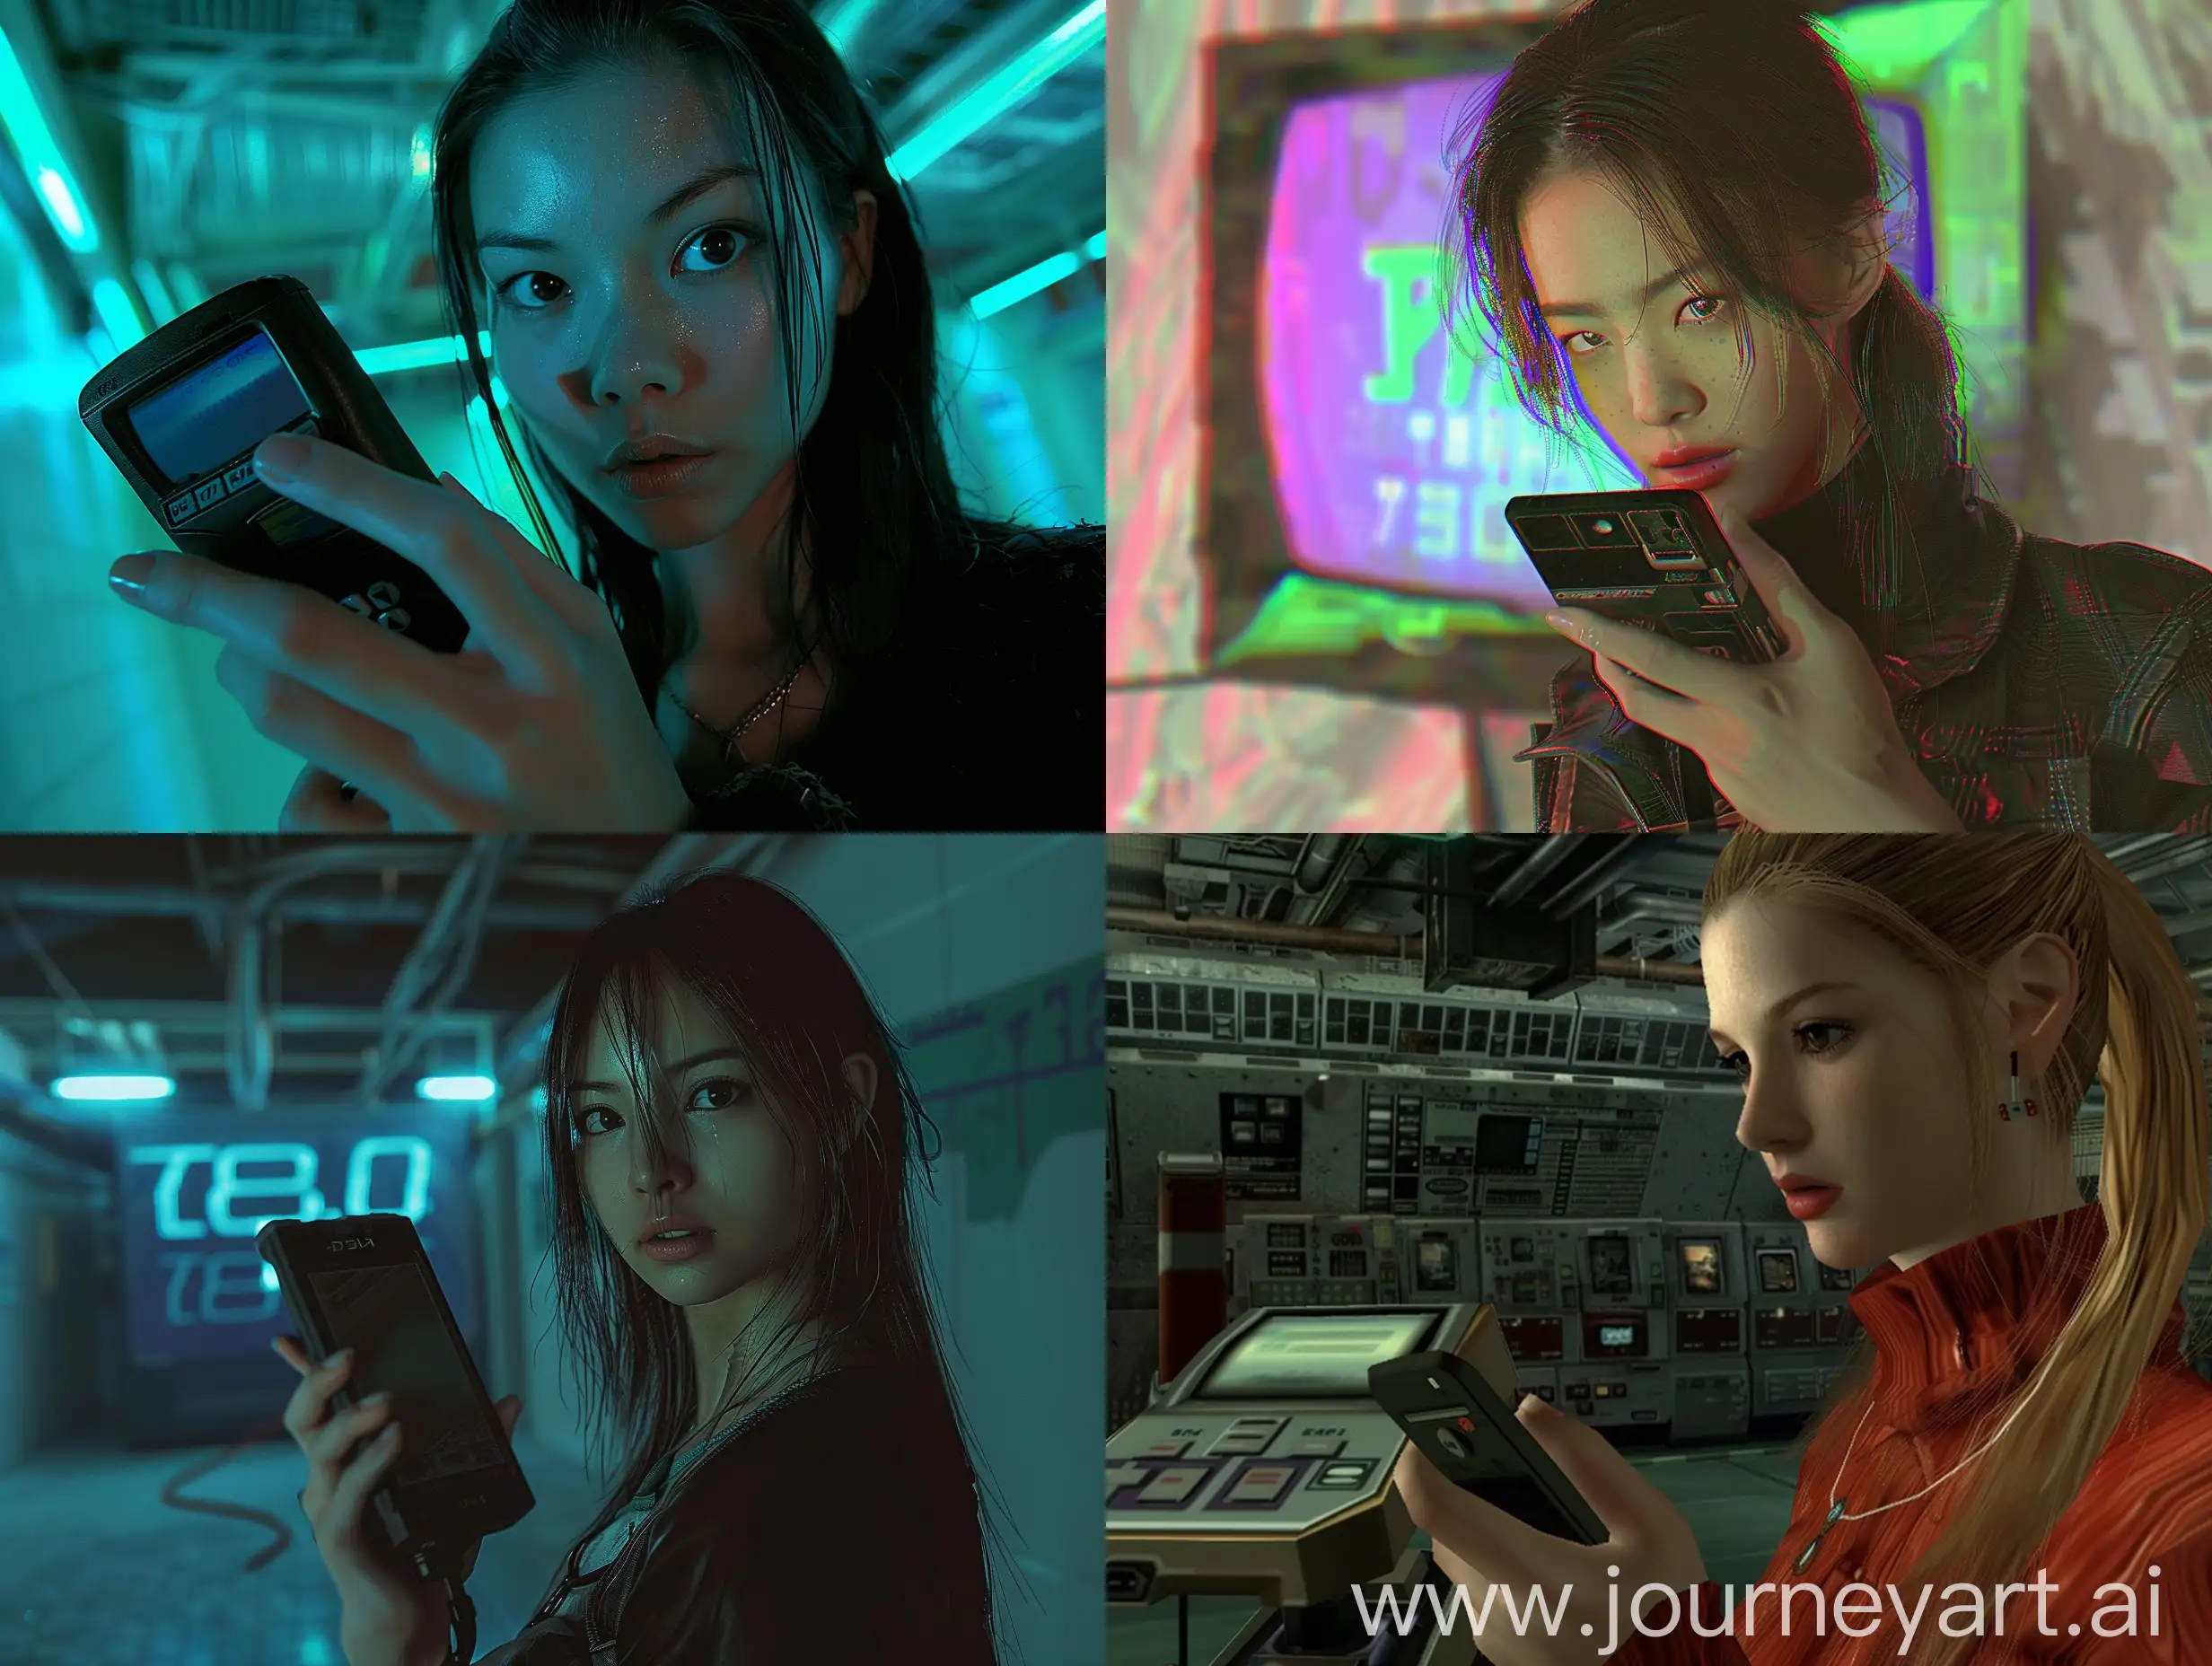 ps2 graphics screengrab of a woman holding a cellphone , genre, retro, modern, futurism, y2k aesthetic, nostalgic trend, environment,